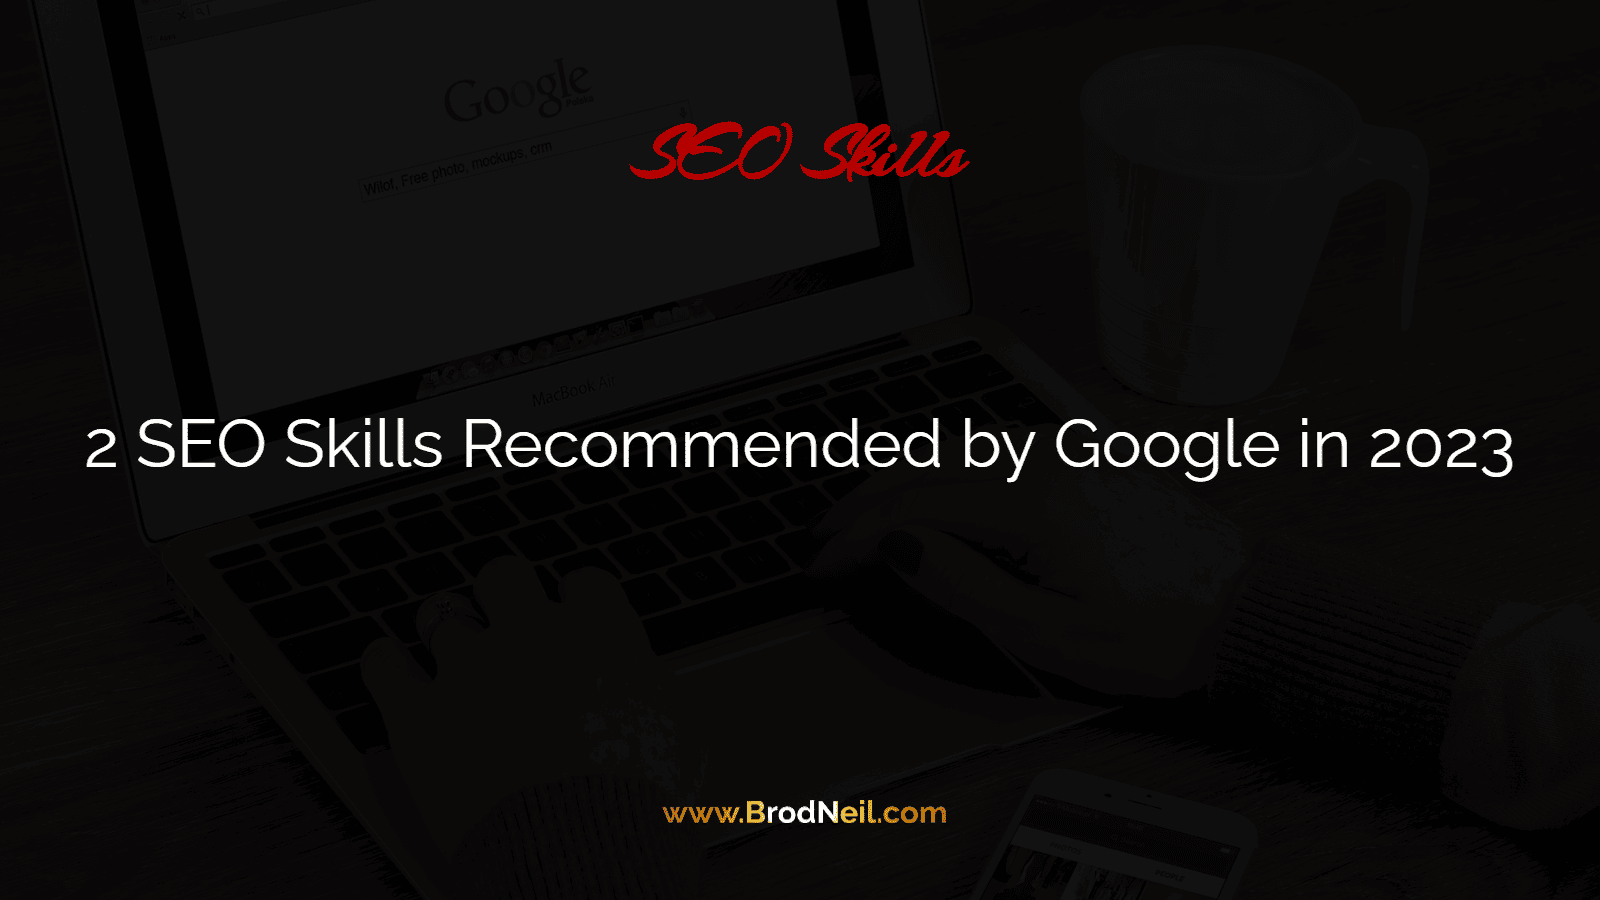 2 SEO Skills Recommended by Google in 2023